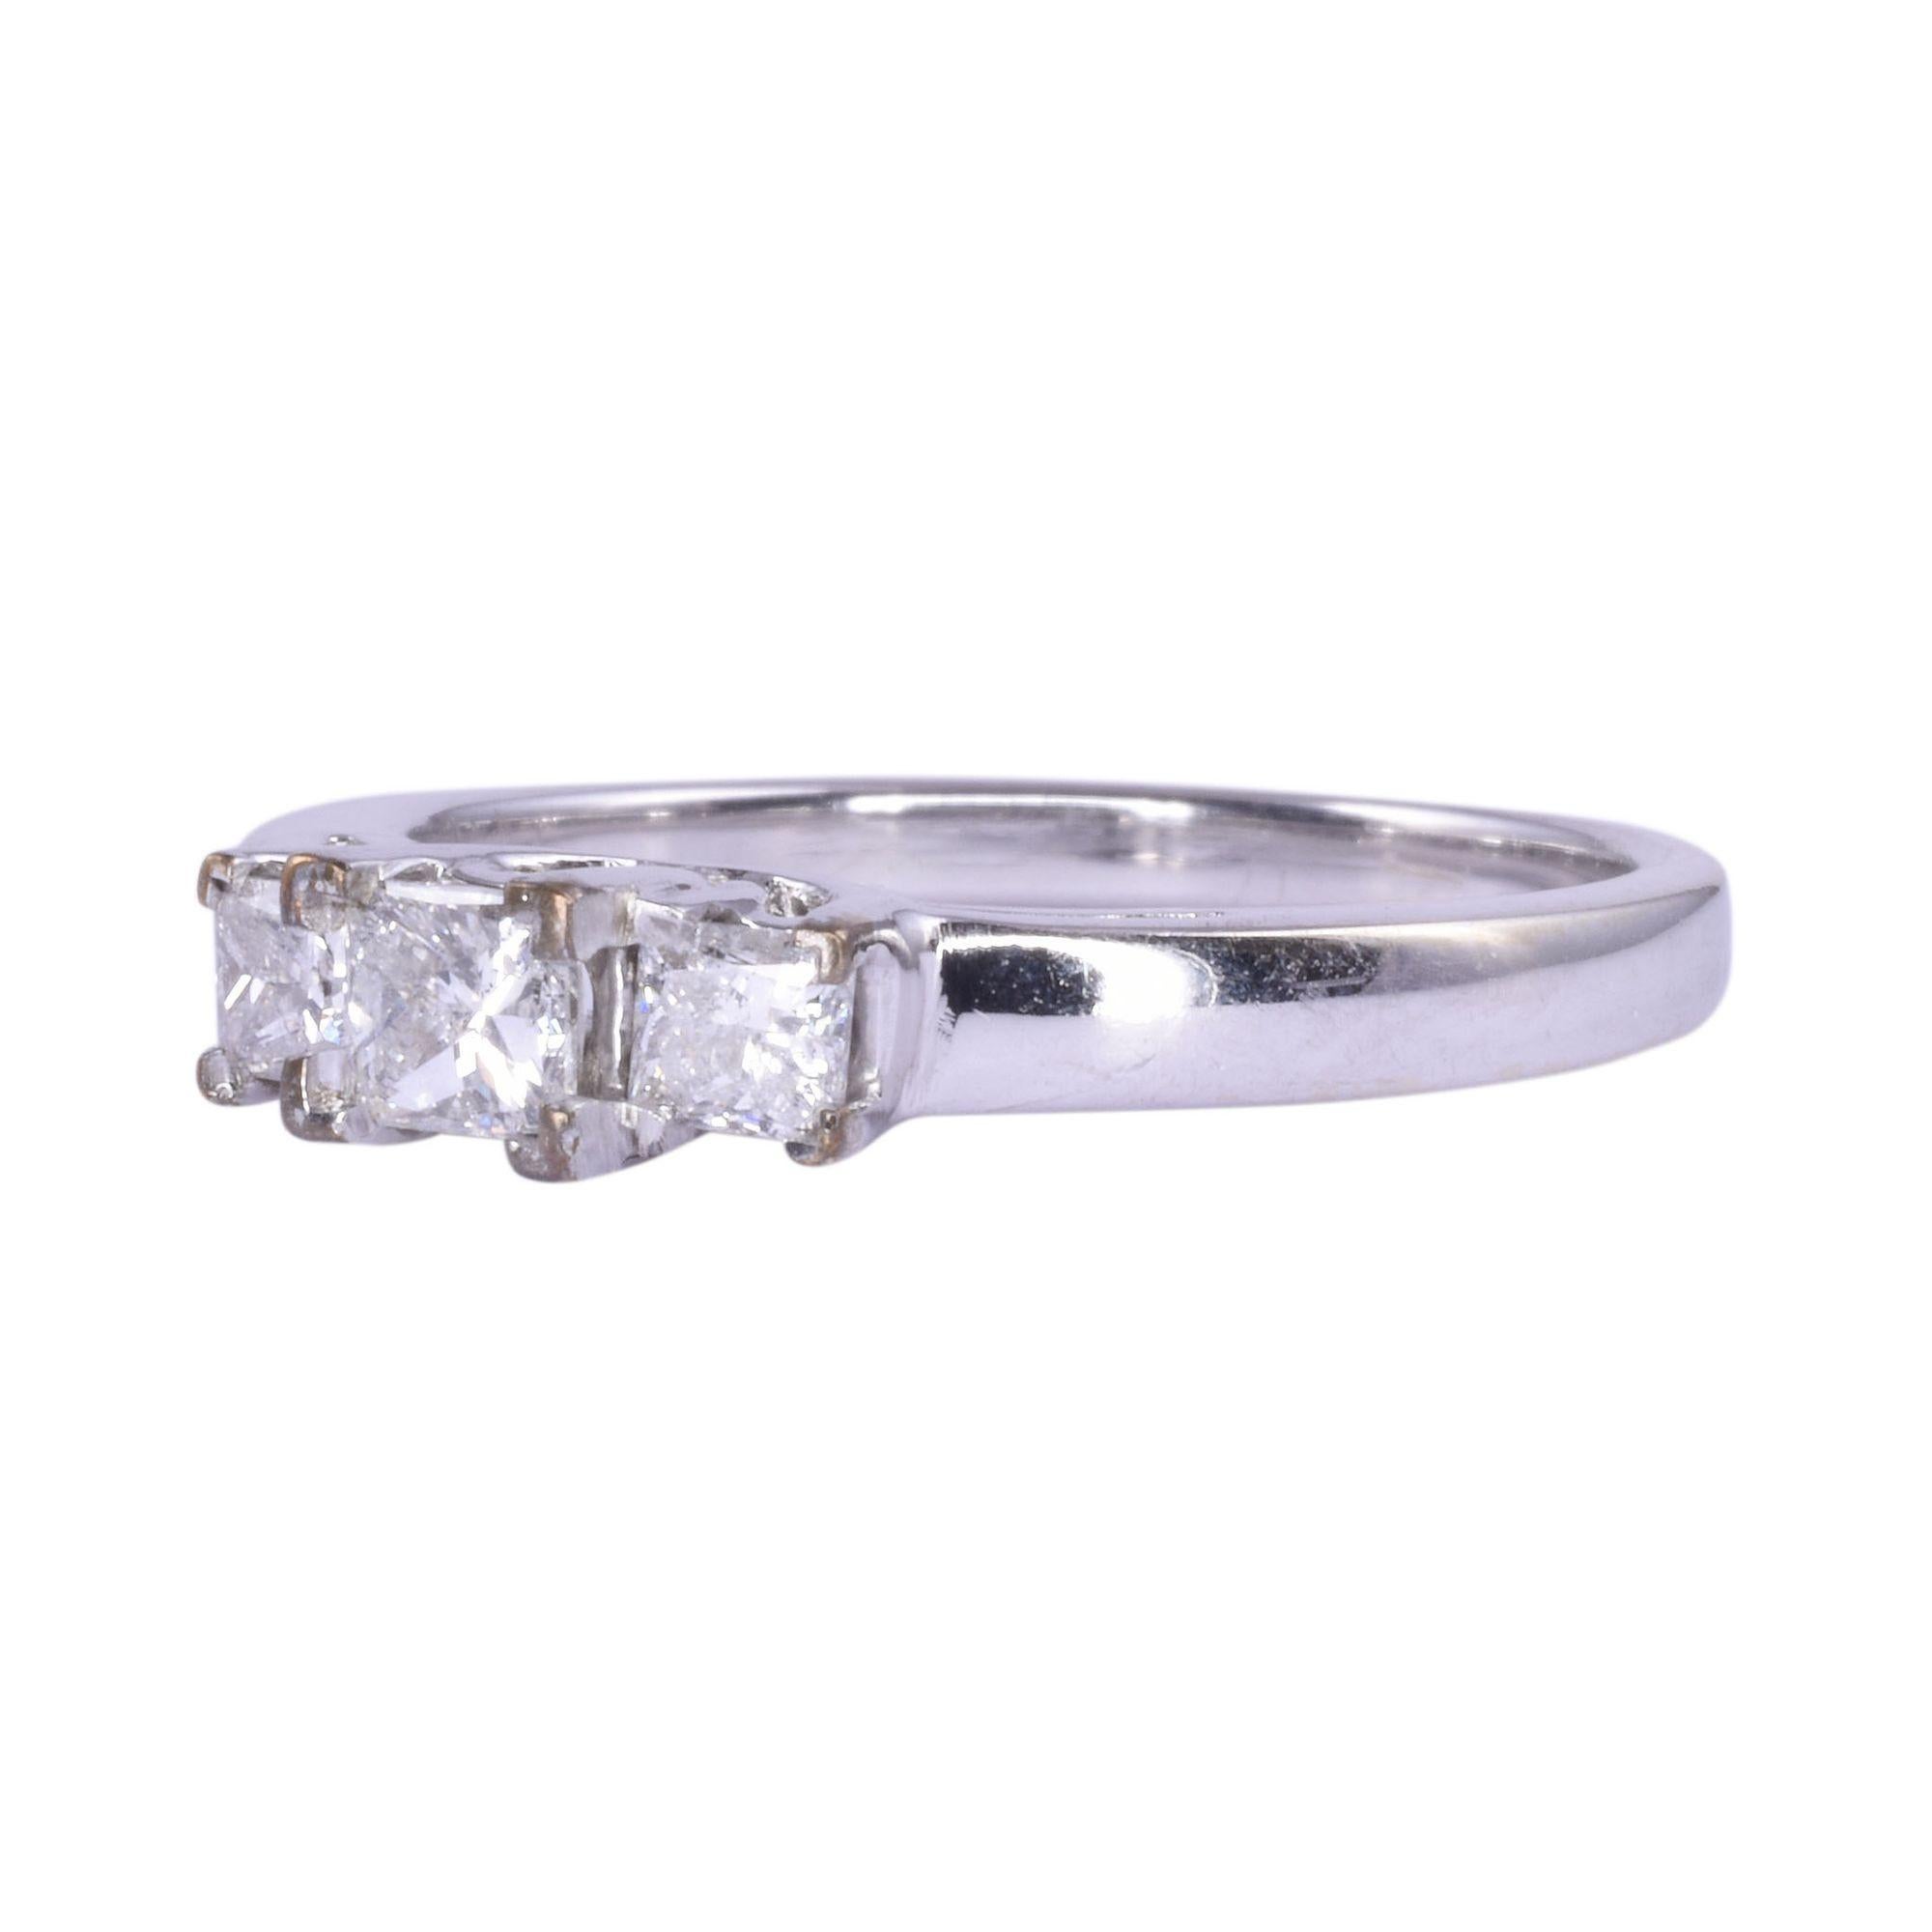 Estate princess cut diamond three stone ring. This 14 karat white gold ring features three princess cut diamonds at .50 carat total weight. The diamonds have SI2 clarity and G-H color. This three stone ring is a size 7.25. [KIMH 570]
 
*Resizing